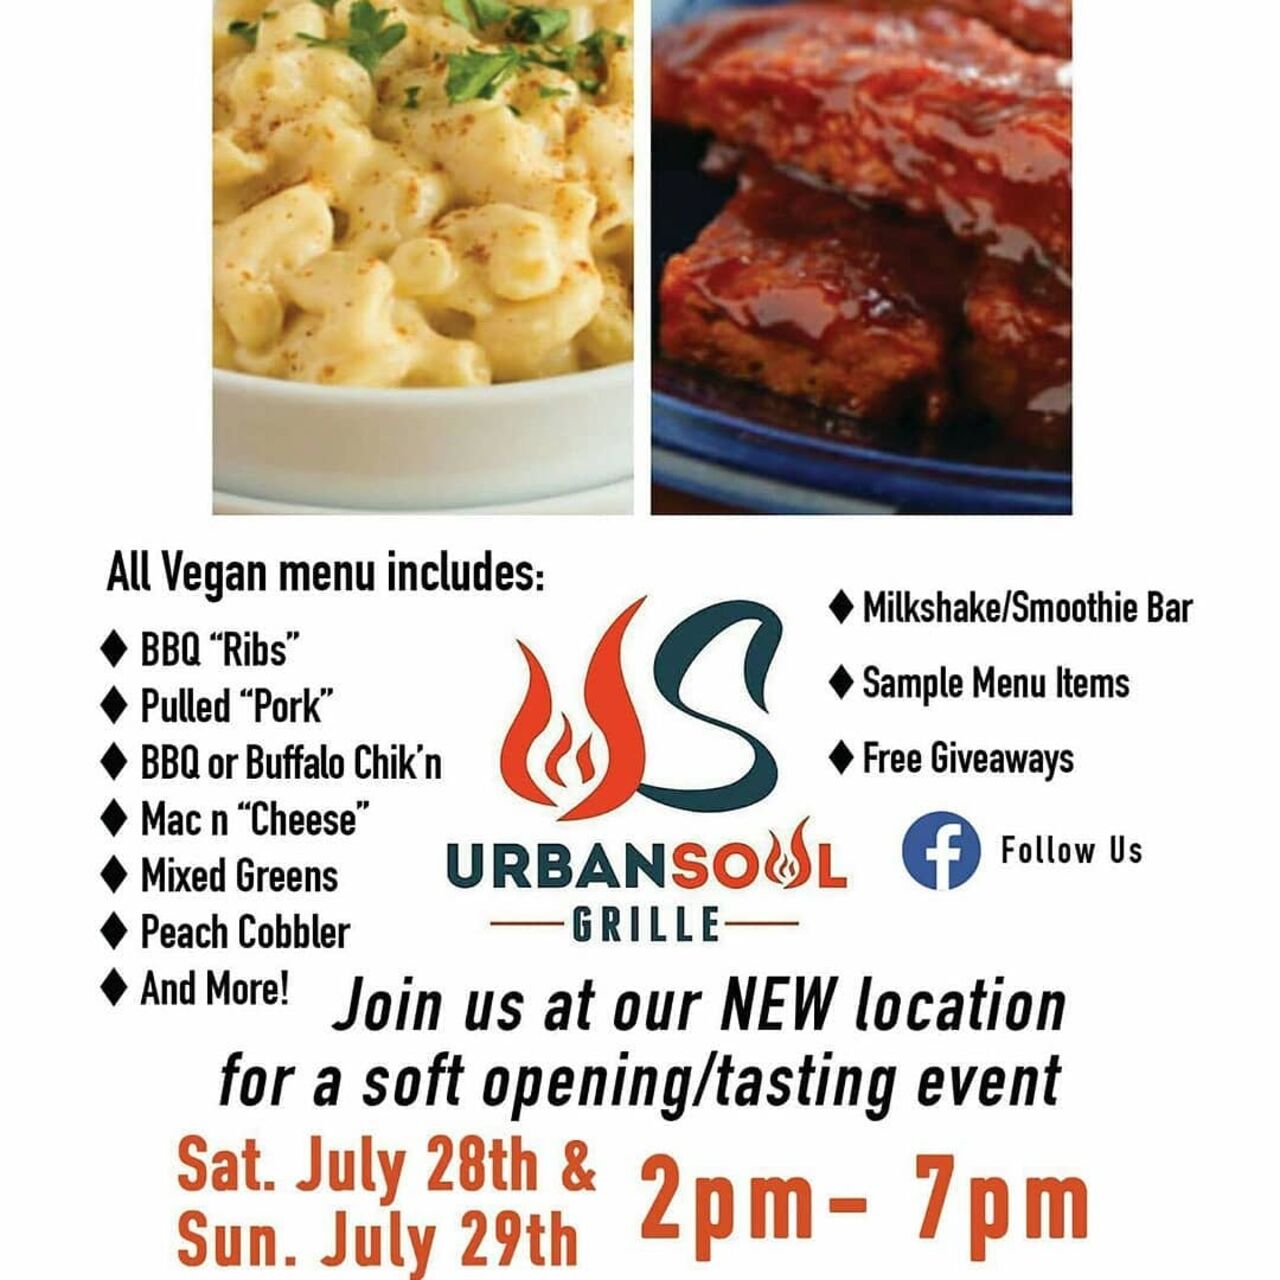 A photo of Urban Soul Grille